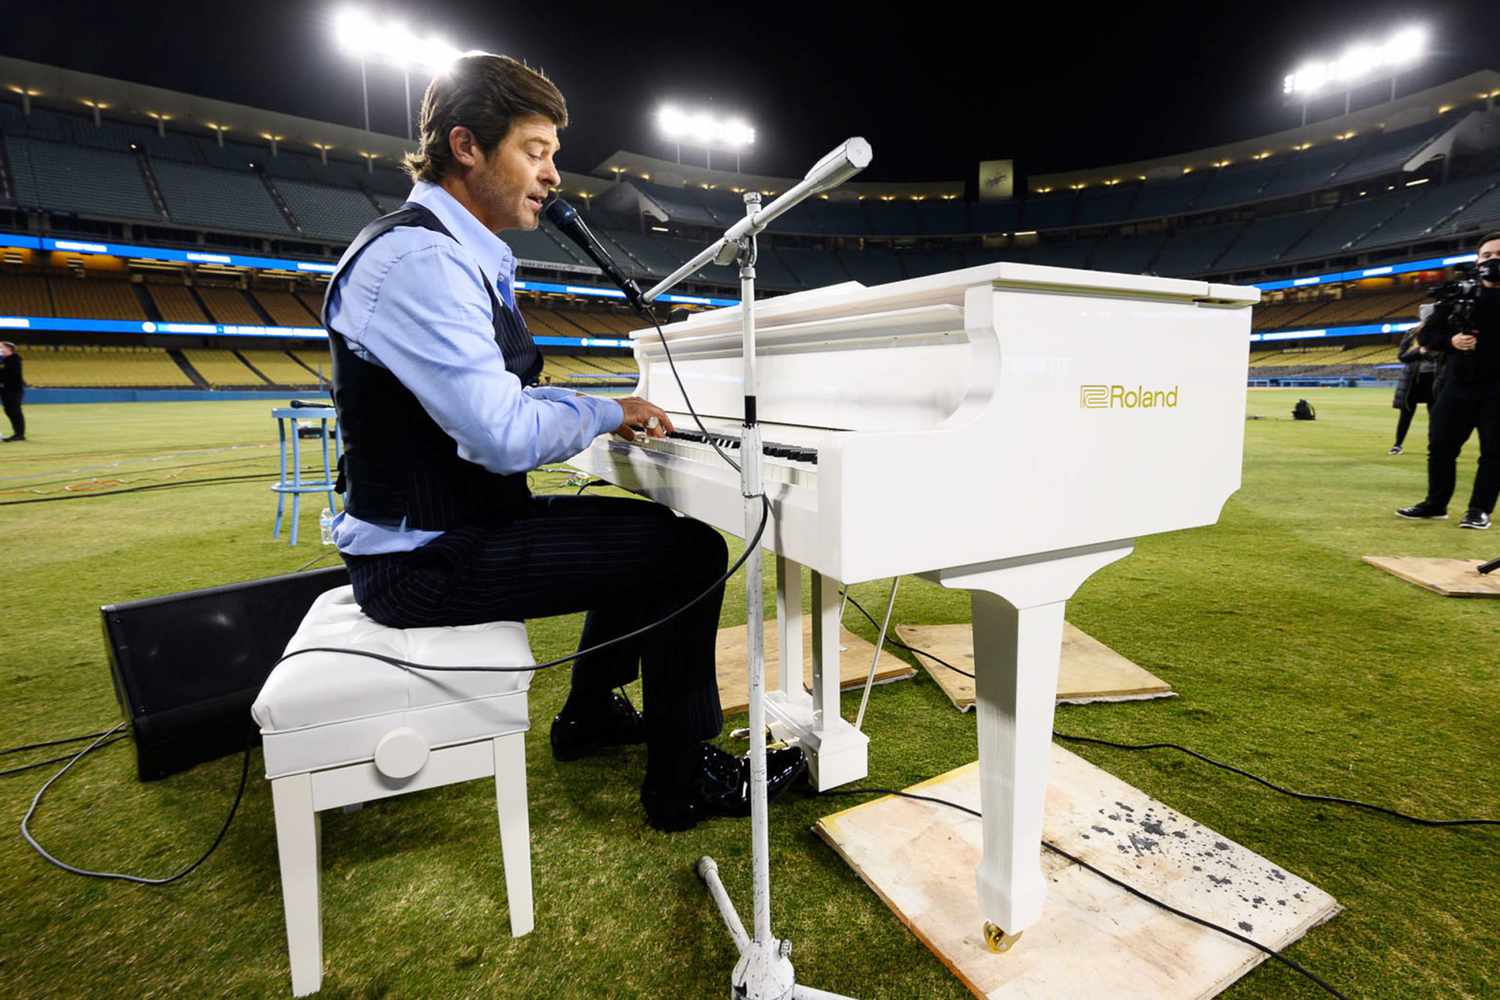 Robin Thicke RWQuarantunes x Los Angeles Dodgers Foundation virtual fundraiser benefiting the Los Angeles Regional Foodbank at Dodger Stadium on Friday, February 12, 2021 in Los Angeles, California